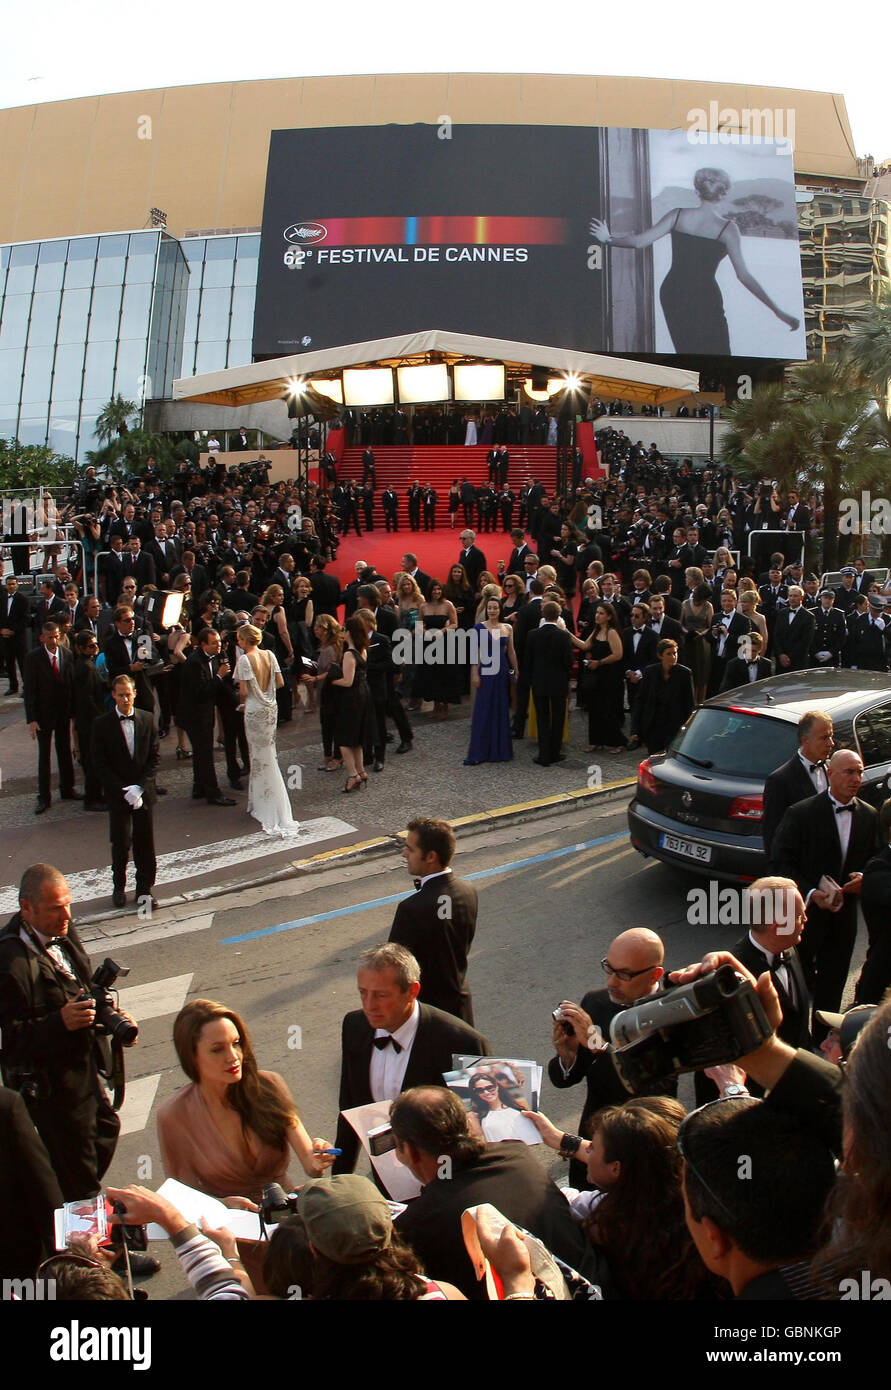 A general view of the Palais des Festivals during the premiere of 'inglourious Basterds' during the 62nd Cannes Film Festival. Stock Photo